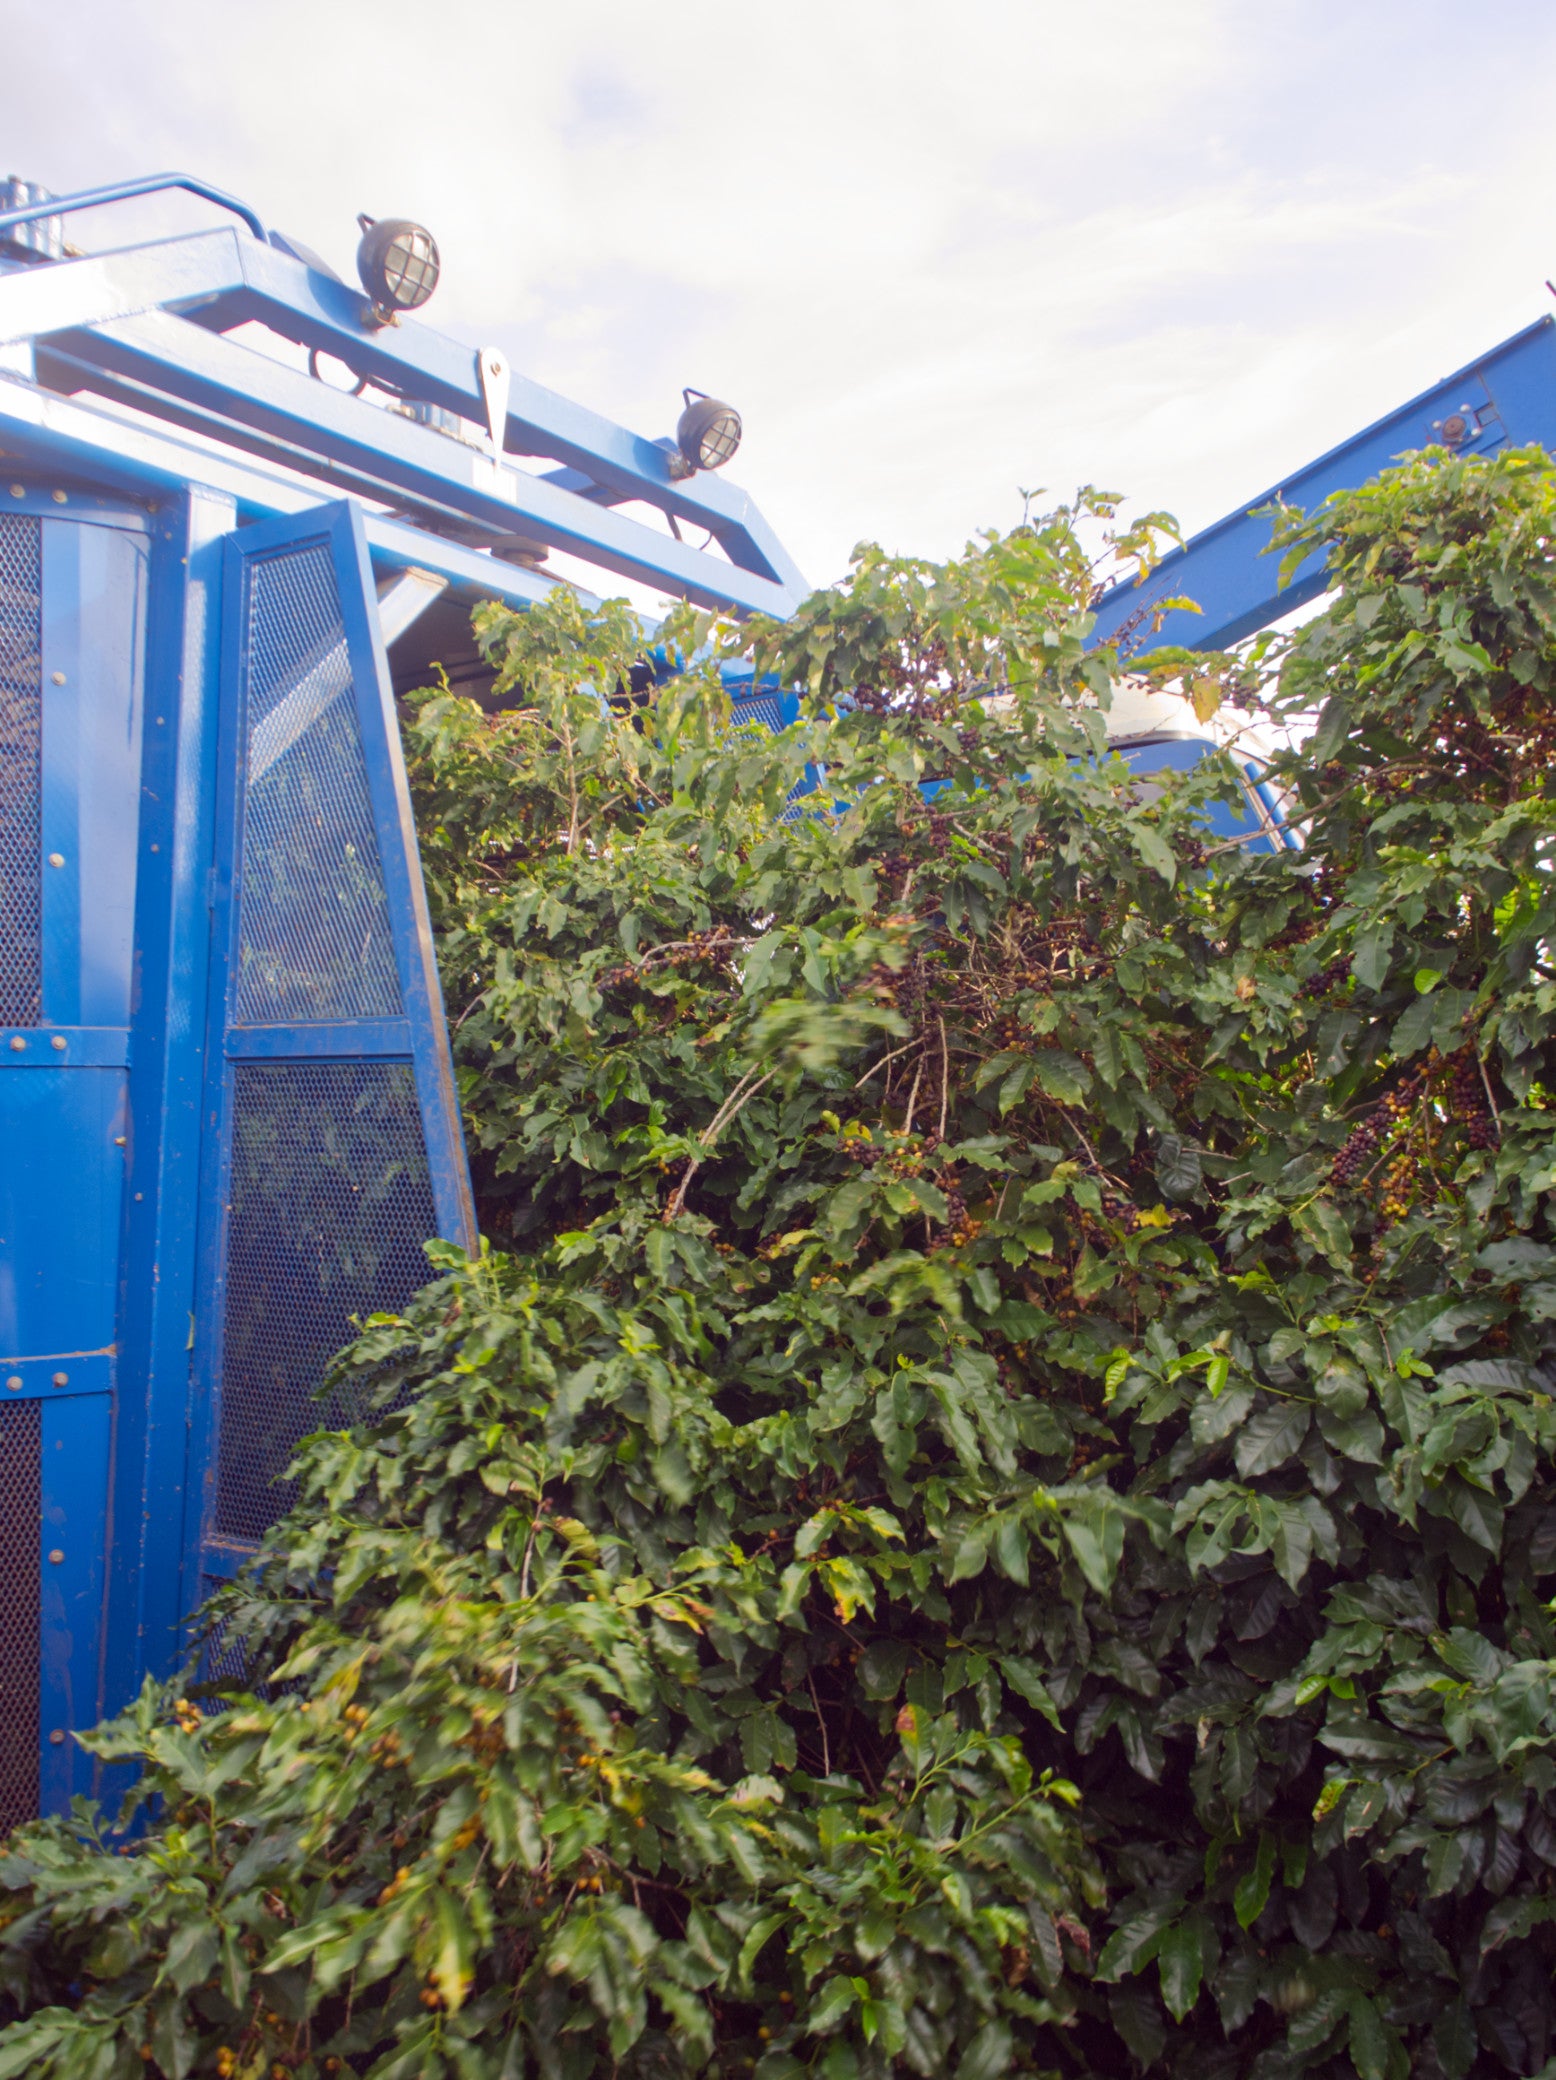 Coffee harvester on a farm in Brazil that Mats visited in 2022.